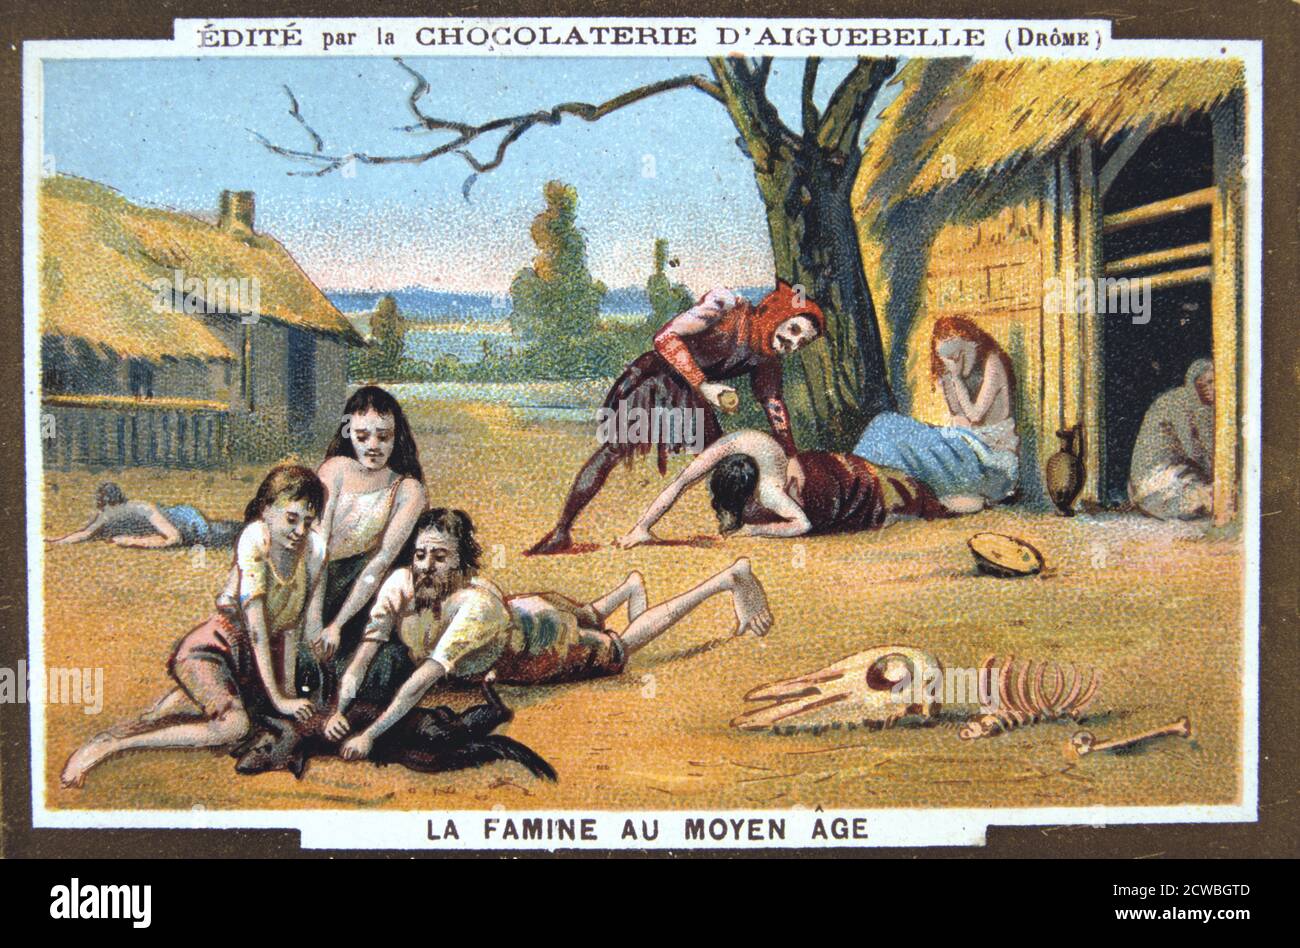 Famine in the Middle Ages, (19th century). A starving family kills a dog for food. Card from a series produced by the chocolate factory at the Monastery of Aiguebelle. Stock Photo